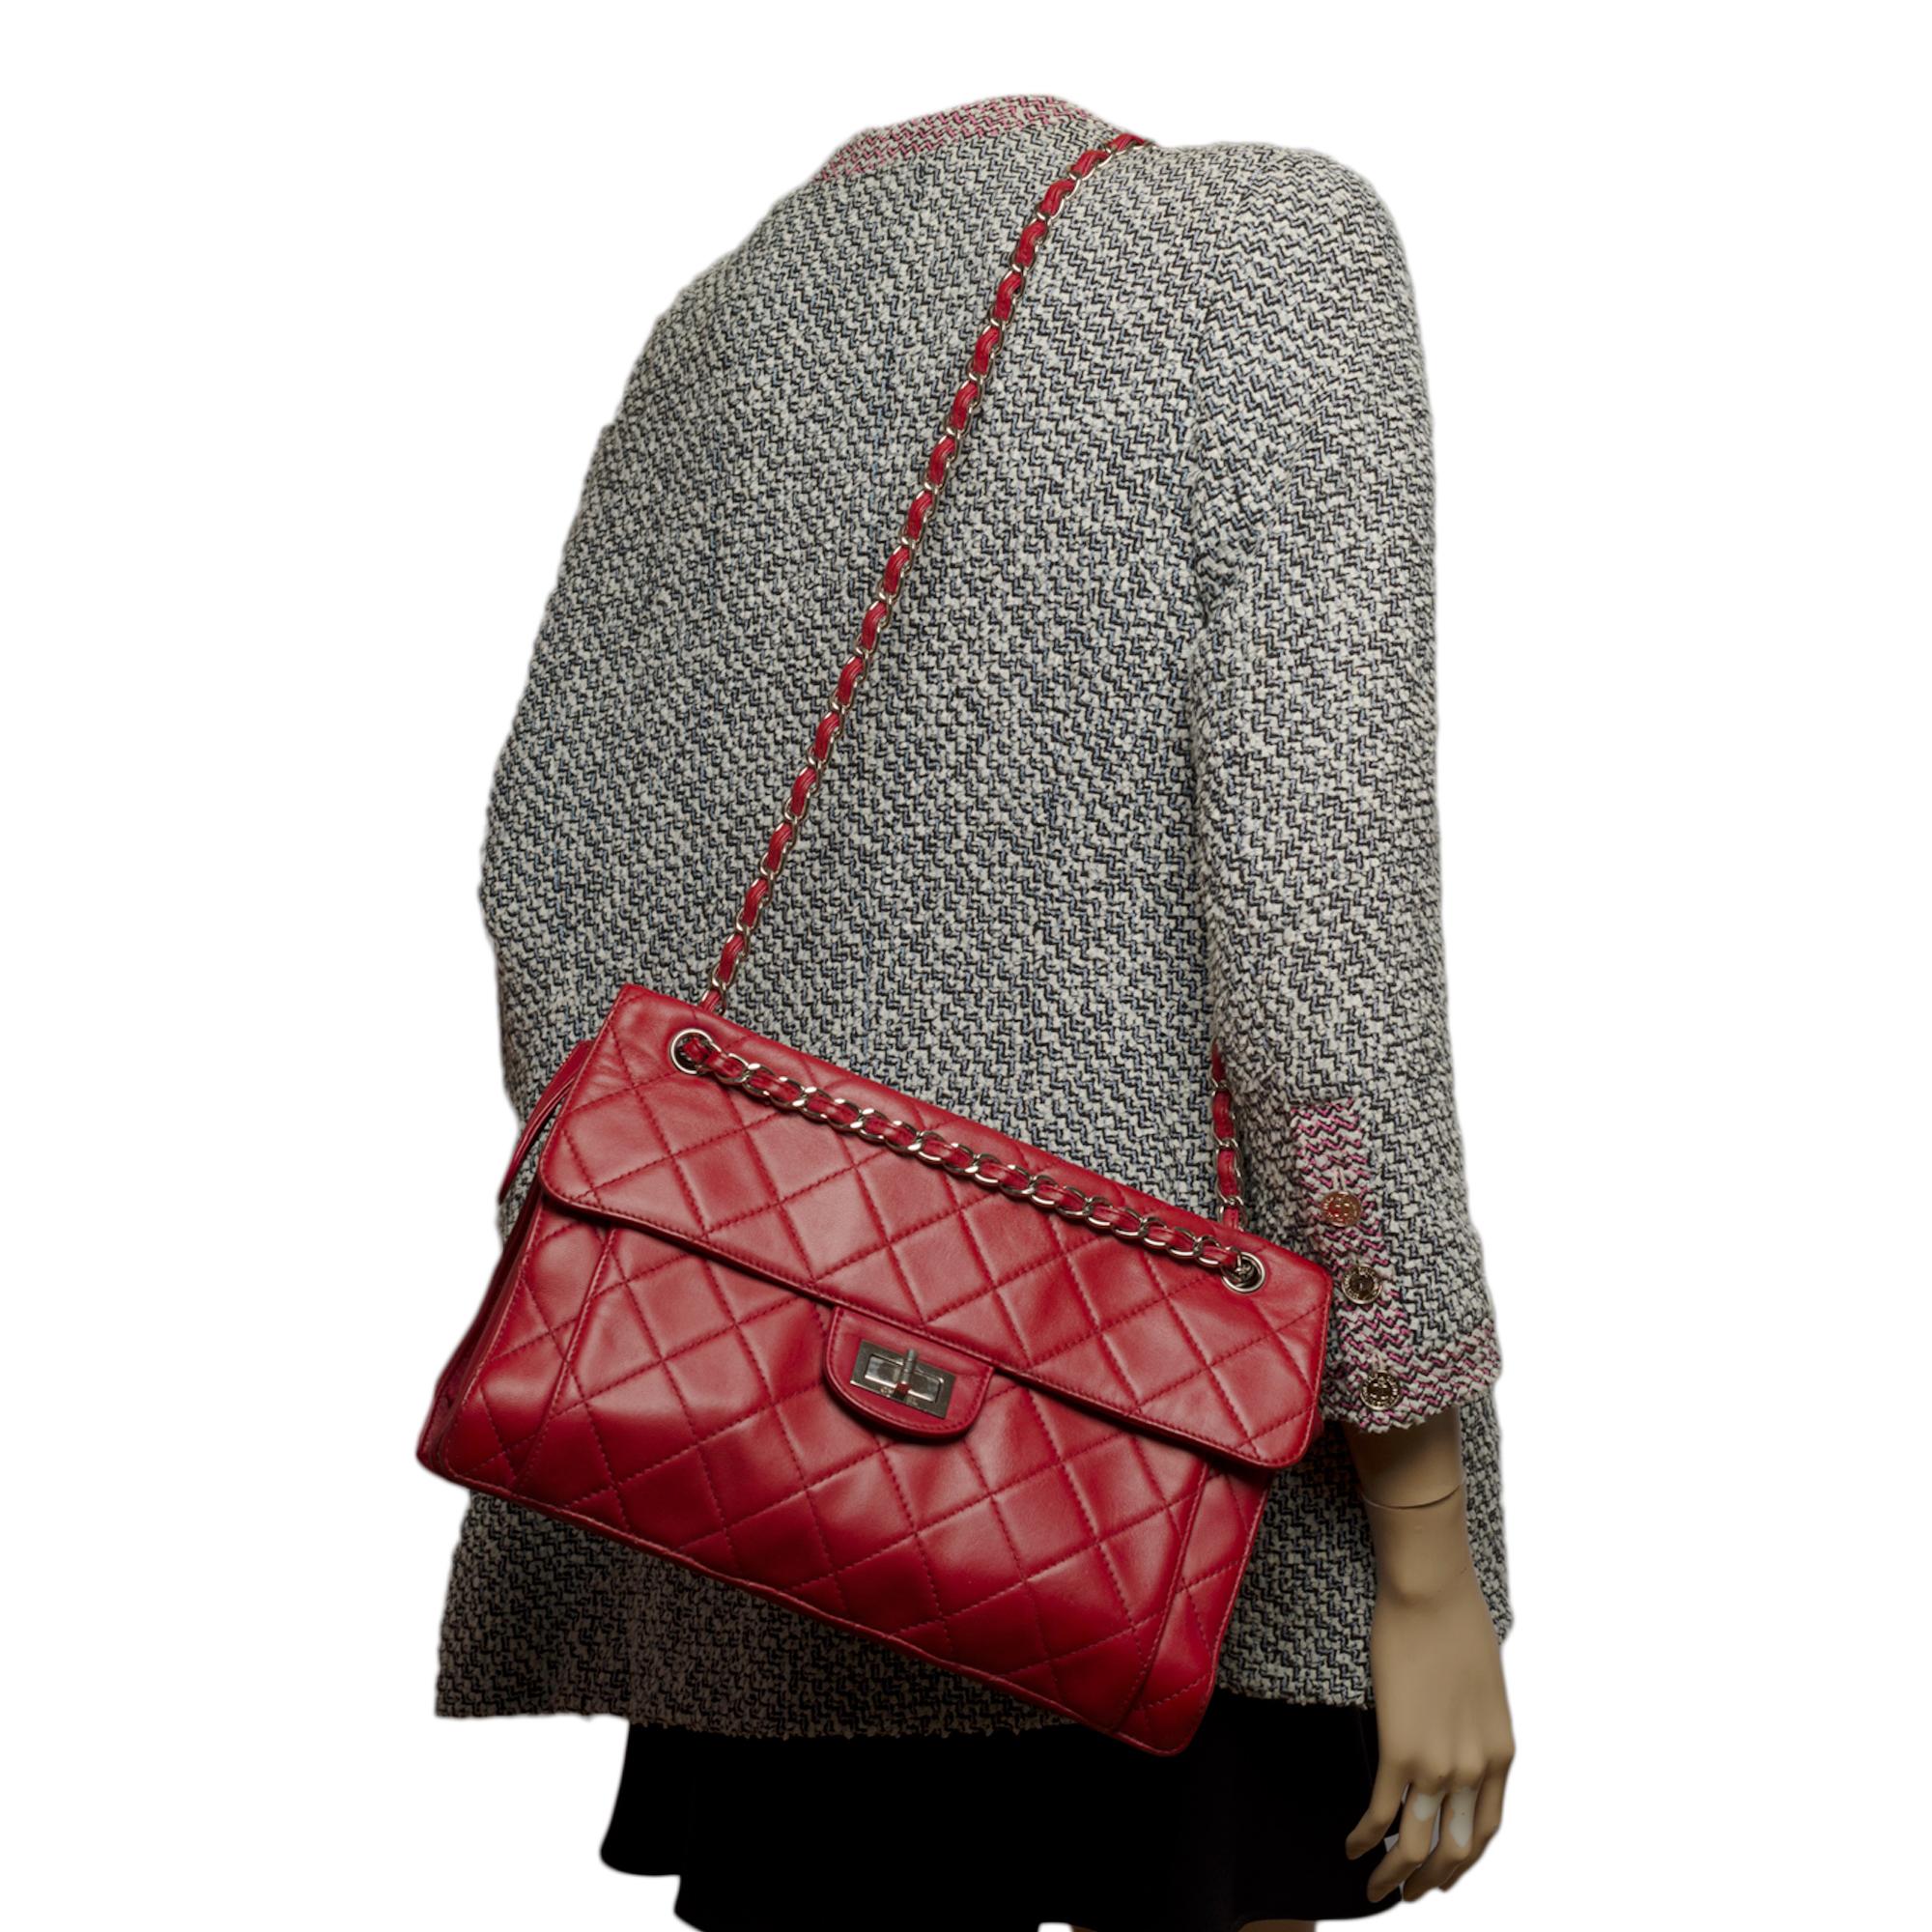 Chanel Classic 2.55 Maxi shoulder bag in red quilted leather, SHW For Sale 8